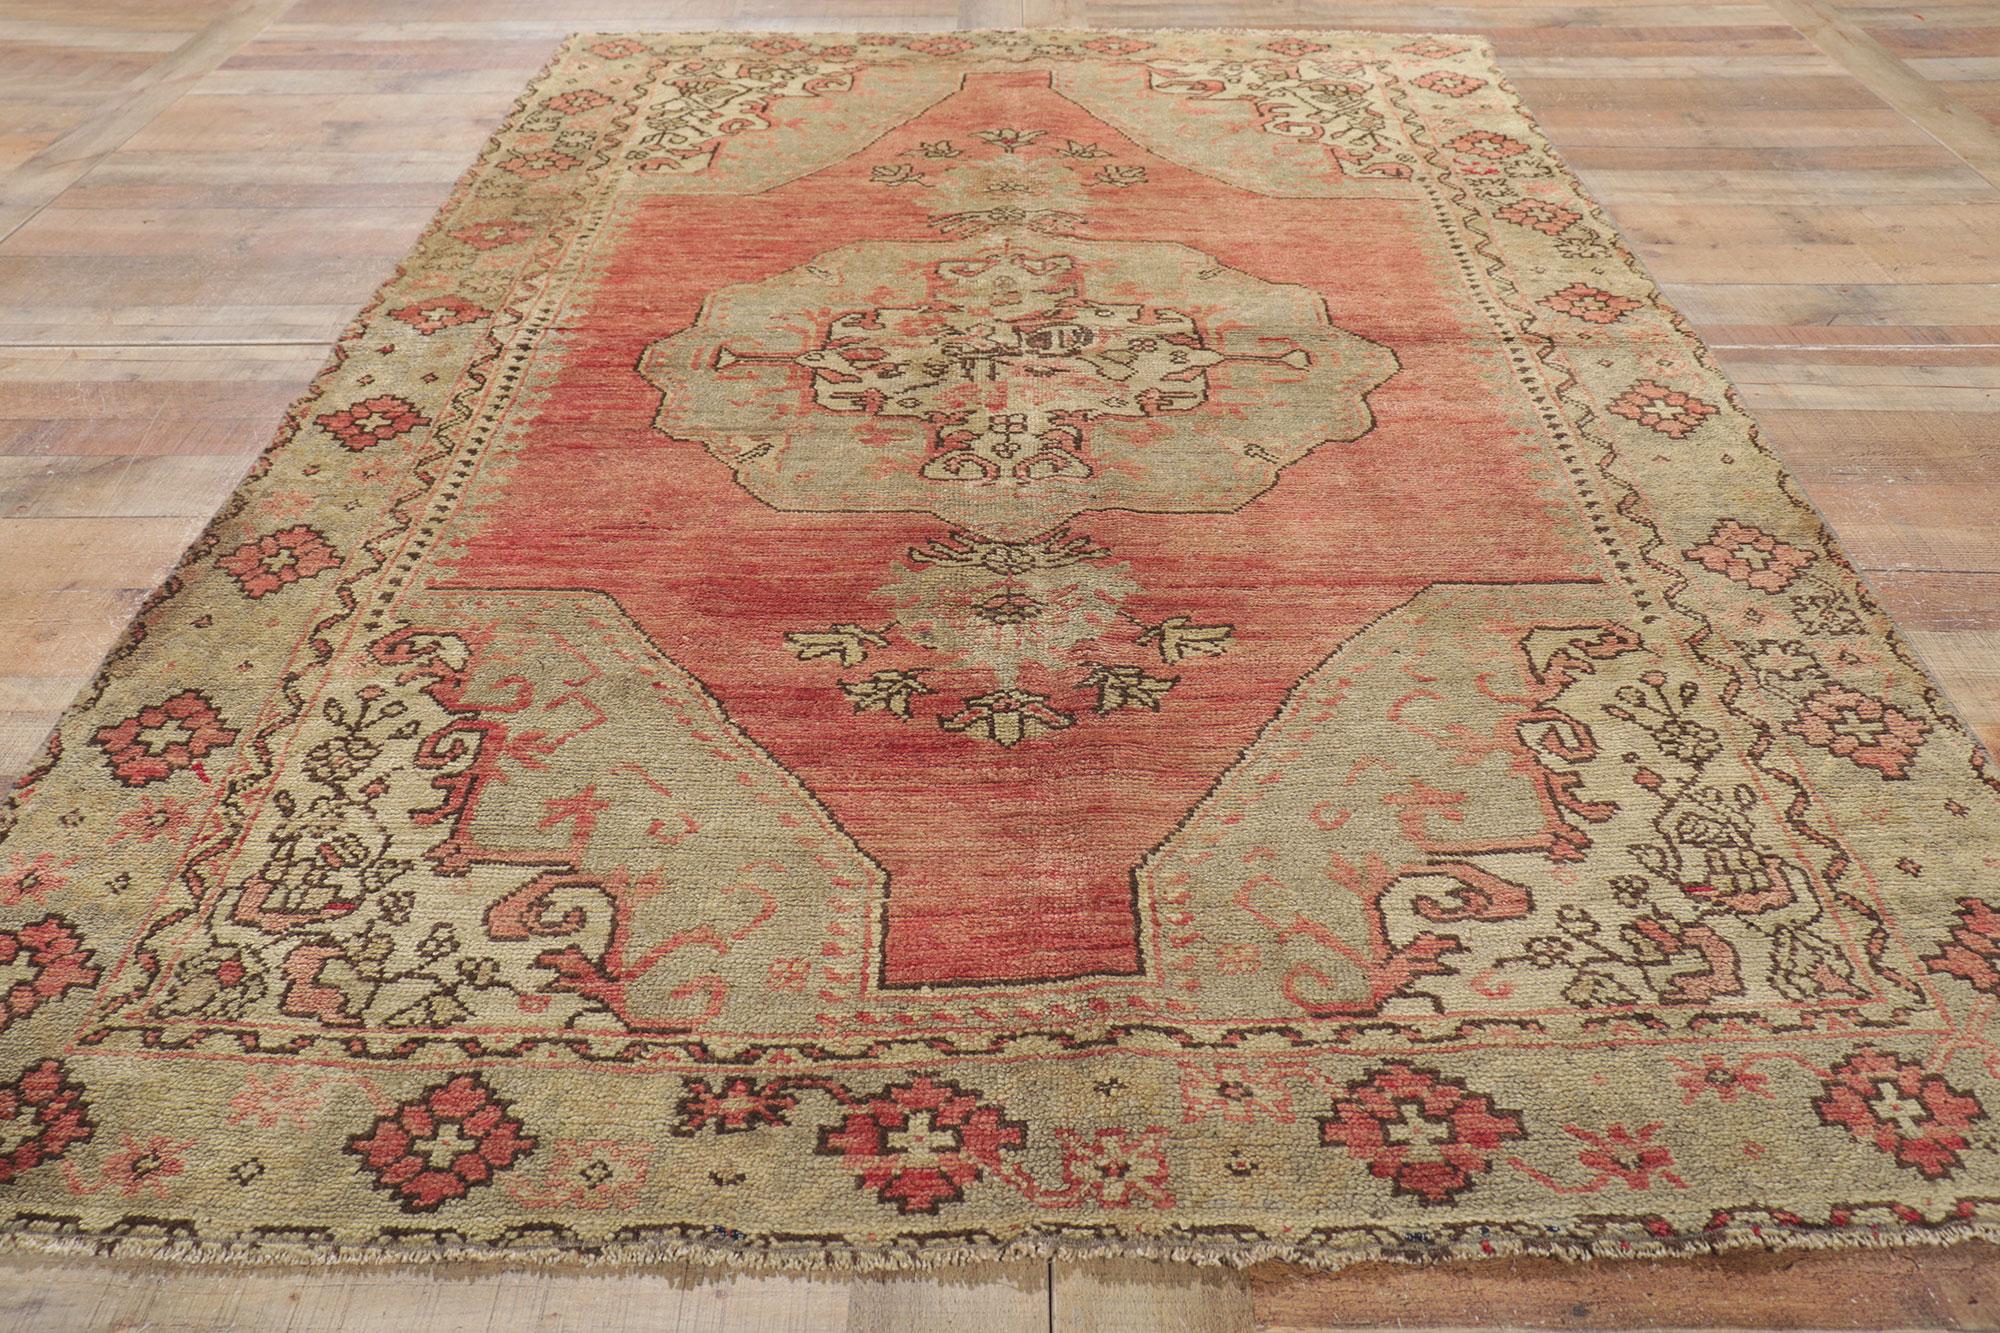 Vintage Turkish Oushak Rug with Rustic Earth-Tone Colors For Sale 2